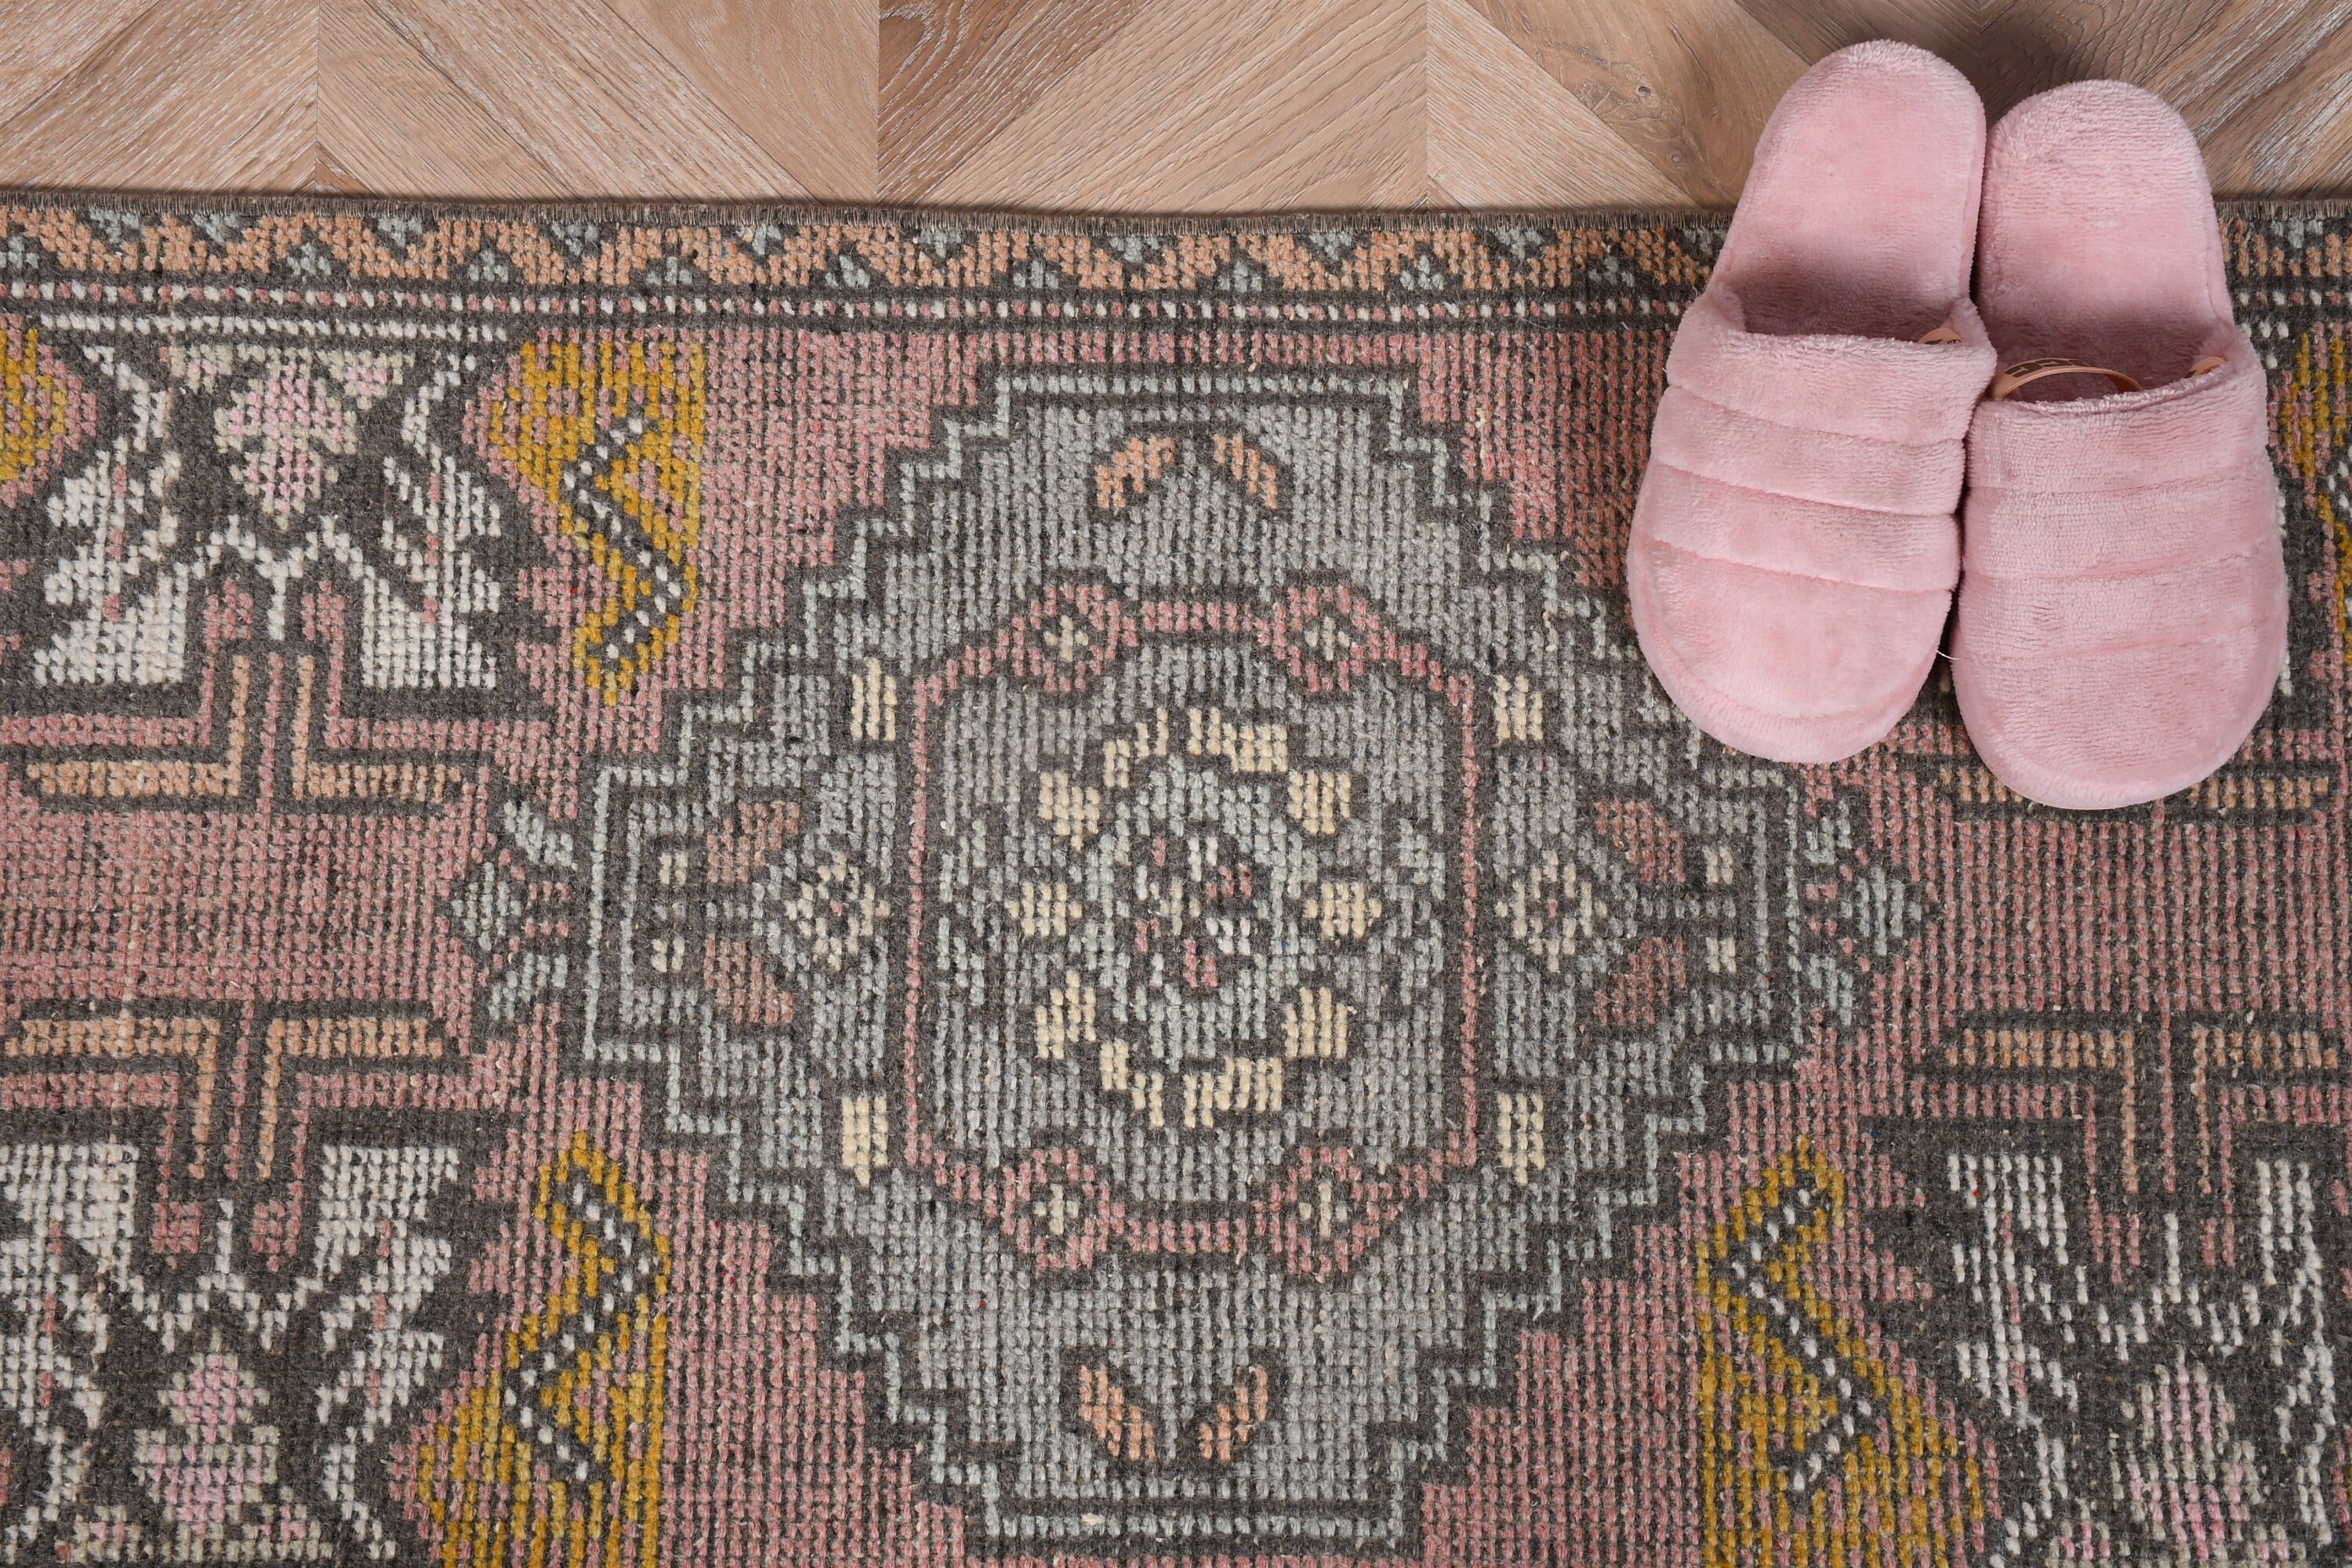 Kitchen Rugs, Turkish Rugs, Pink Cool Rug, Entry Rug, Floor Rugs, Vintage Rug, 1.7x3 ft Small Rug, Rugs for Entry, Hand Woven Rug, Bath Rug